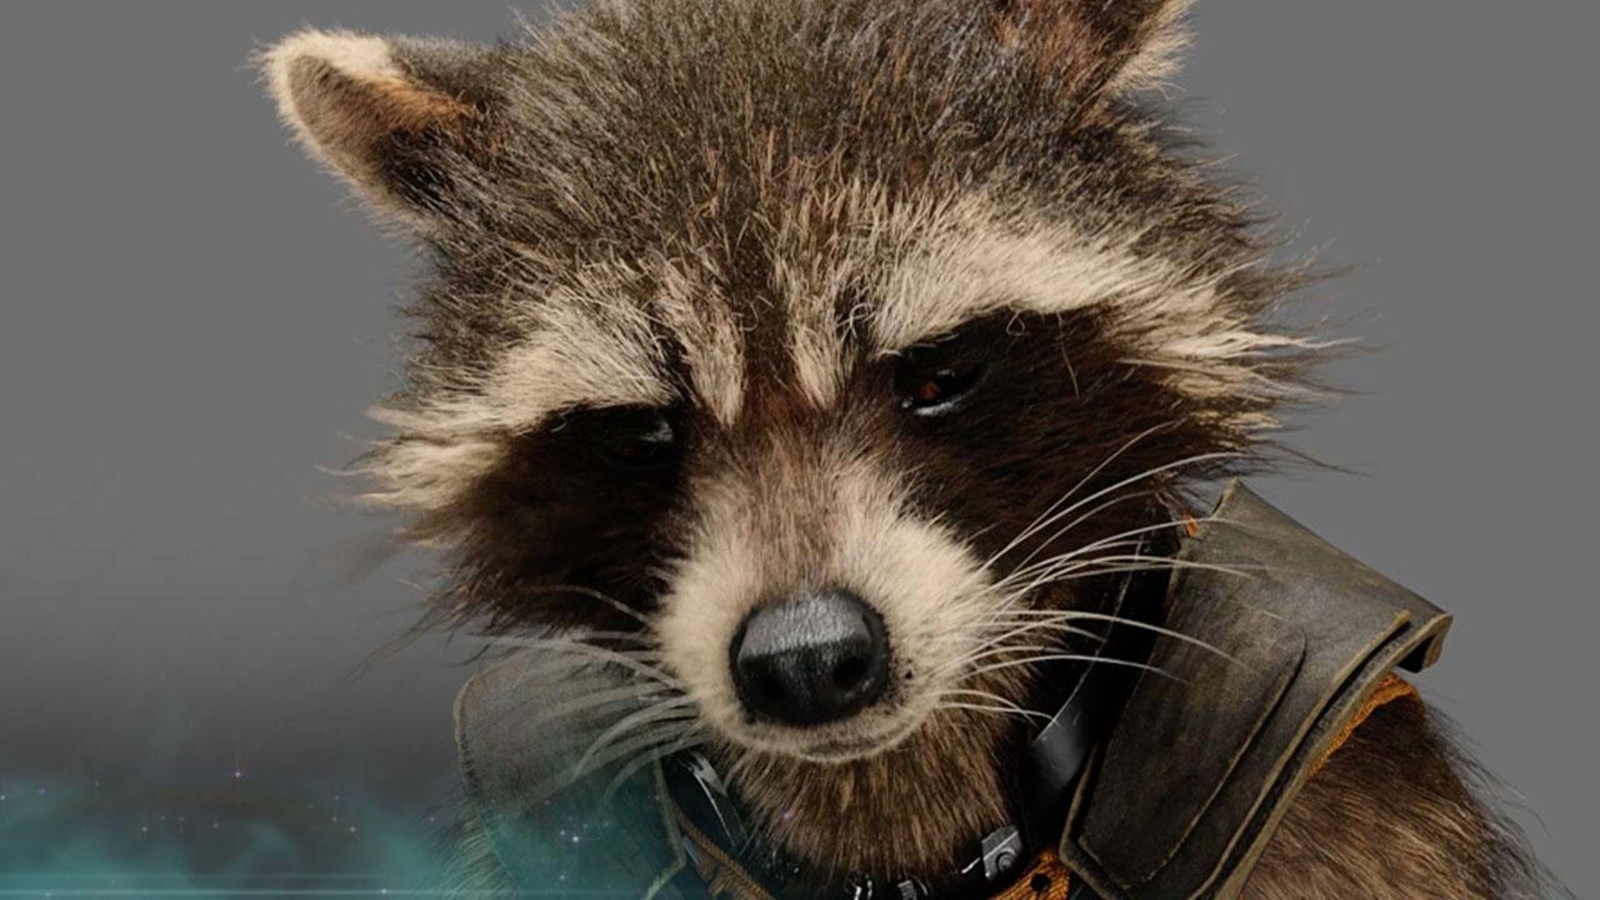 Of The Galaxy Rocket Raccoon Photos HD Wallpaper Image Pictures